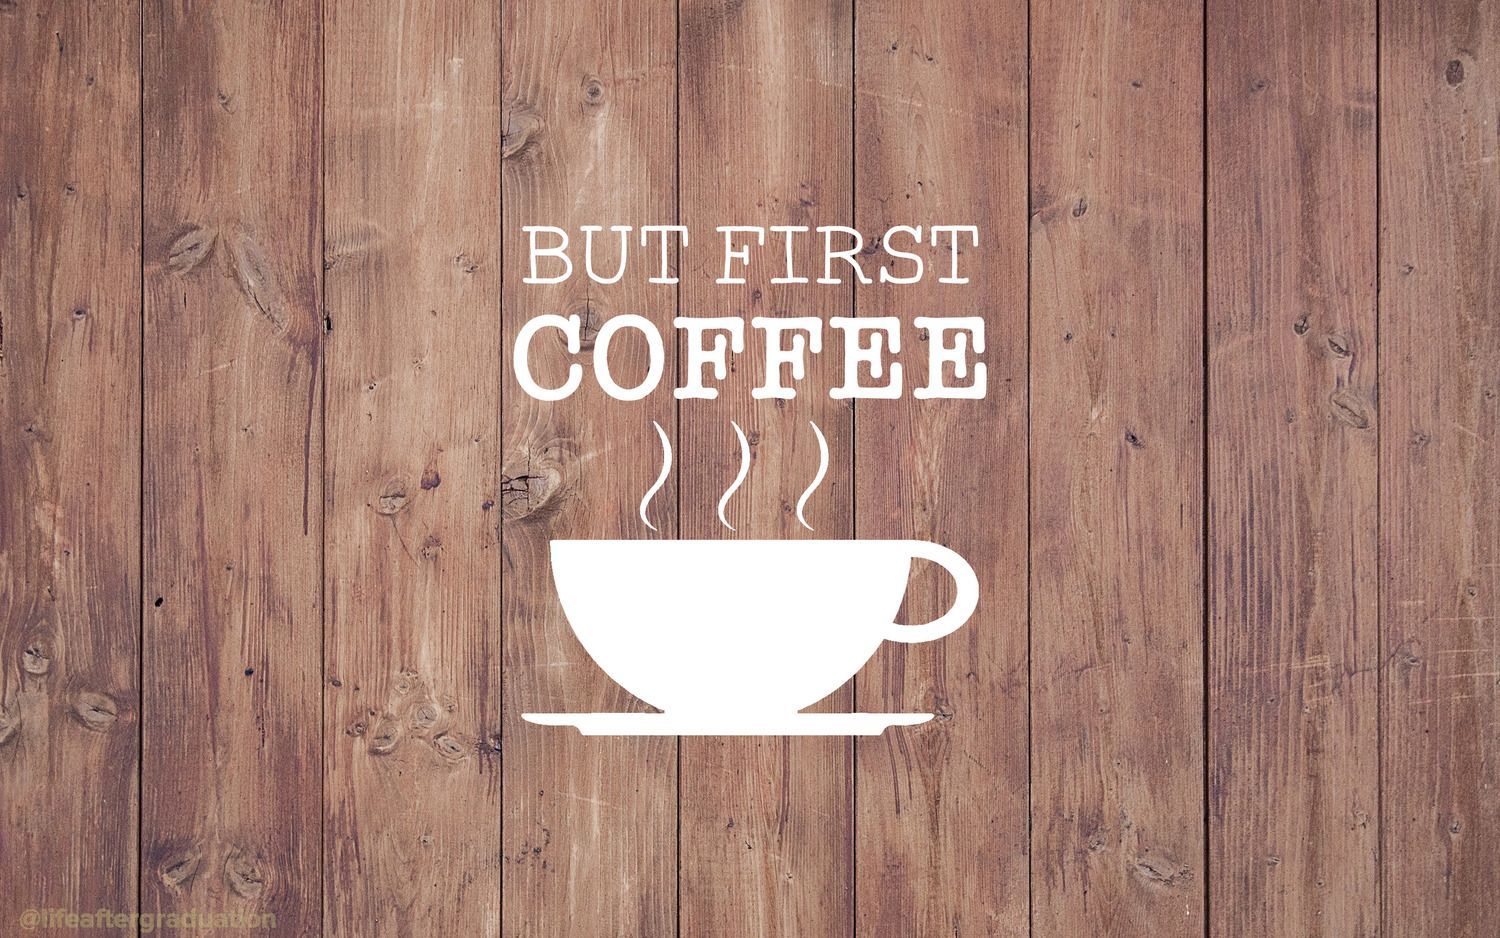 Coffee Quotes Wallpapers